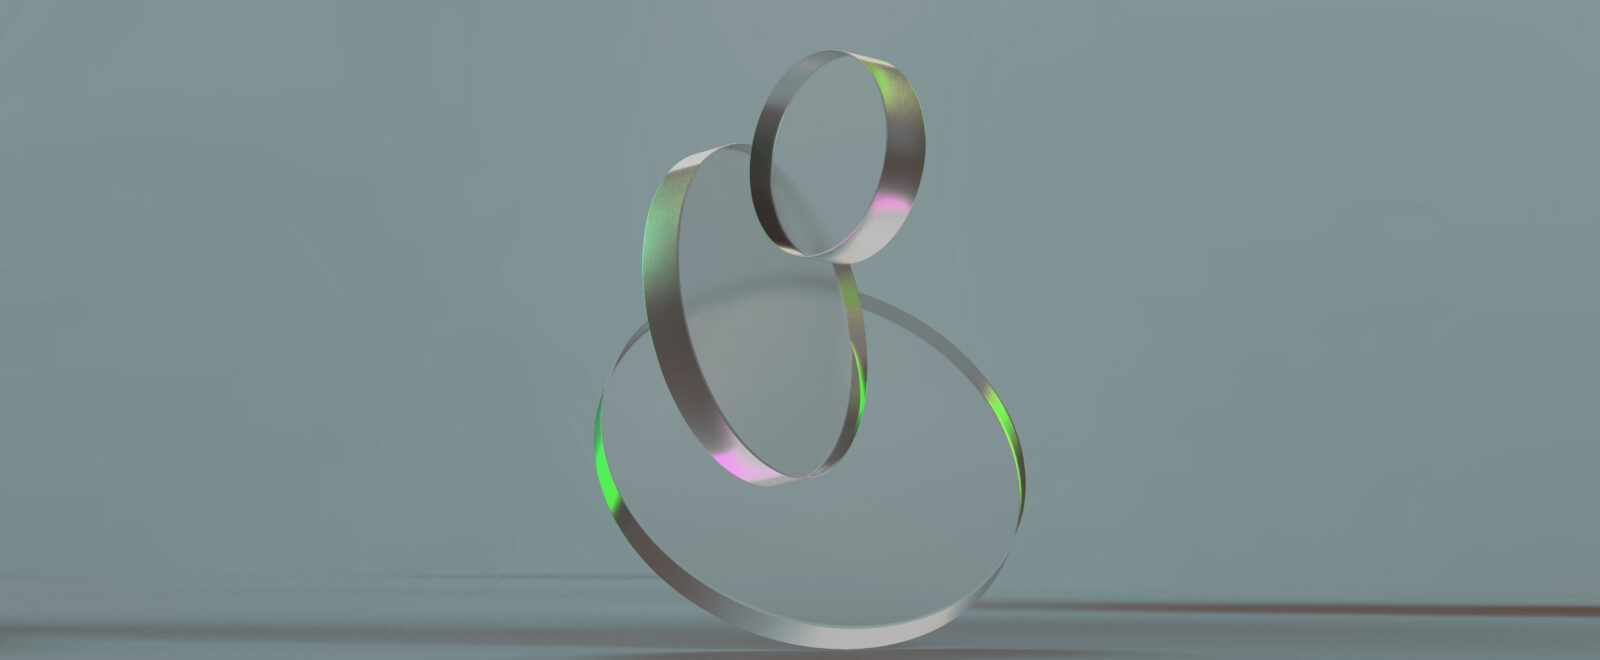 3D rendered round shapes in transparent material on a light back